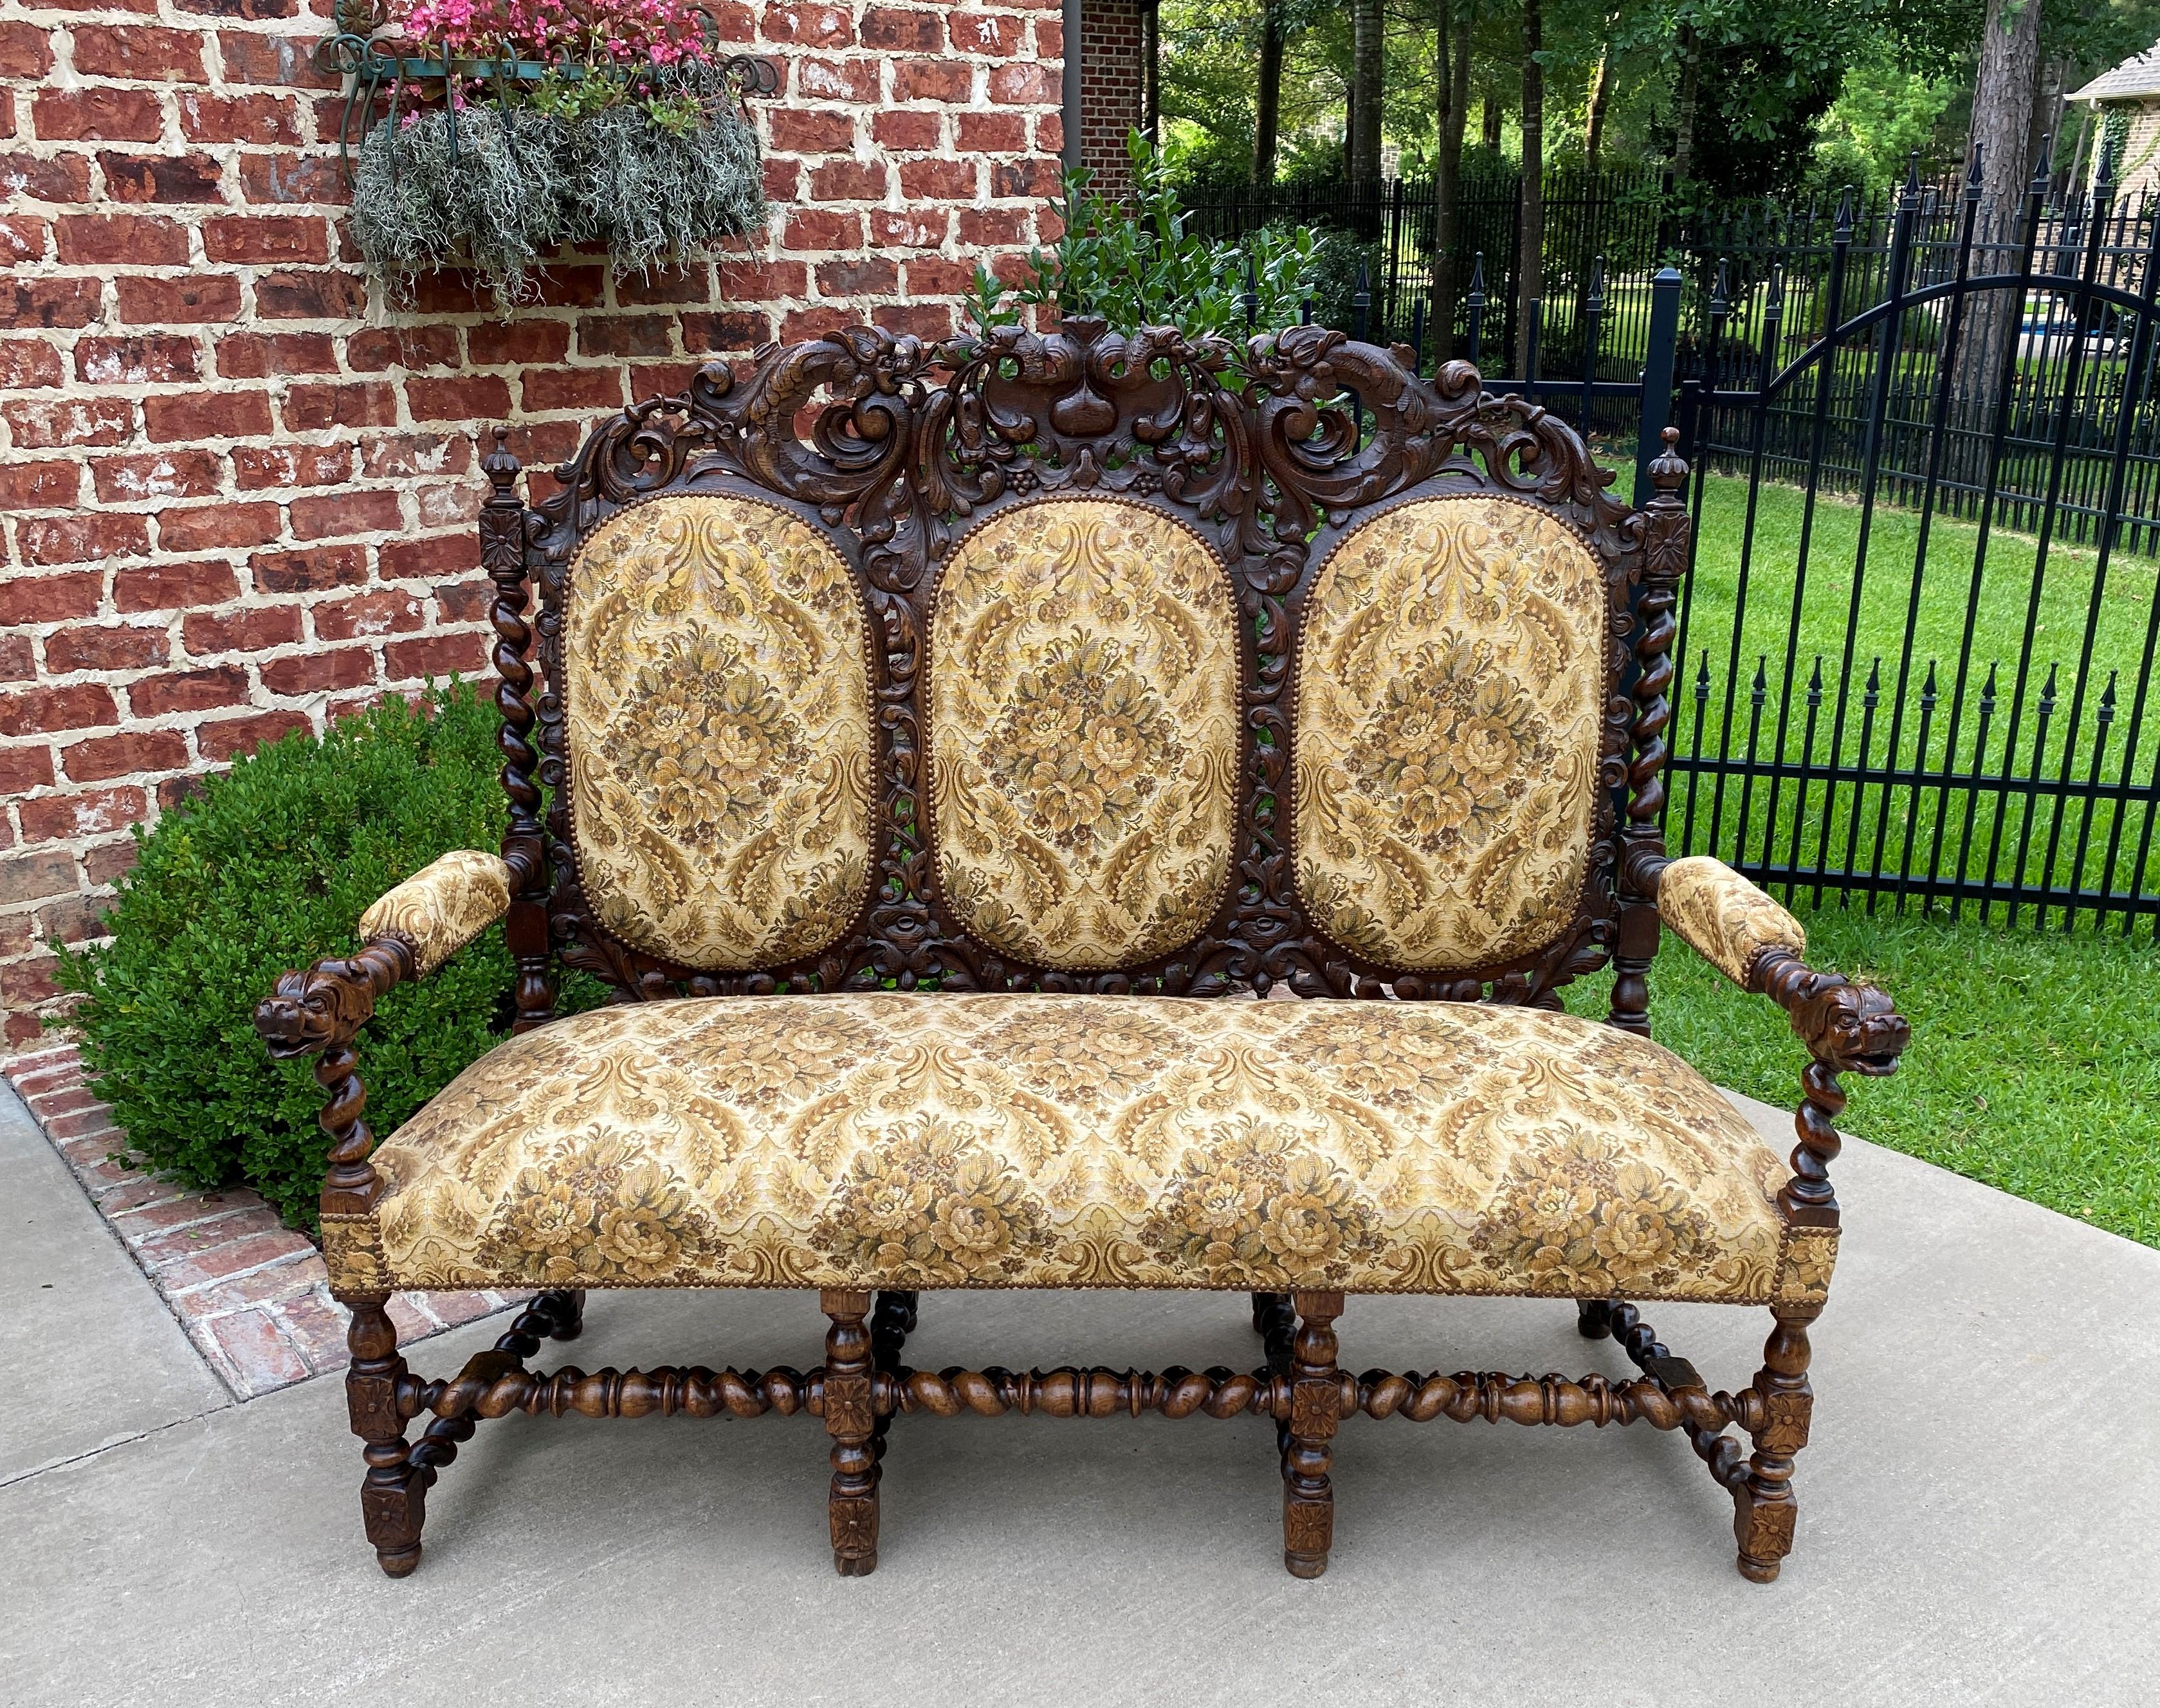 BEAUTIFUL Antique French BARLEY TWIST Upholstered Sofa, Settee, Loveseat, or Bench~~HIGHLY CARVED Oak~~Dog Masks~~c. 1880s

Versatile piece with so many functions~~use as a traditional living area sofa, entry or hall bench, in a bedroom or sitting